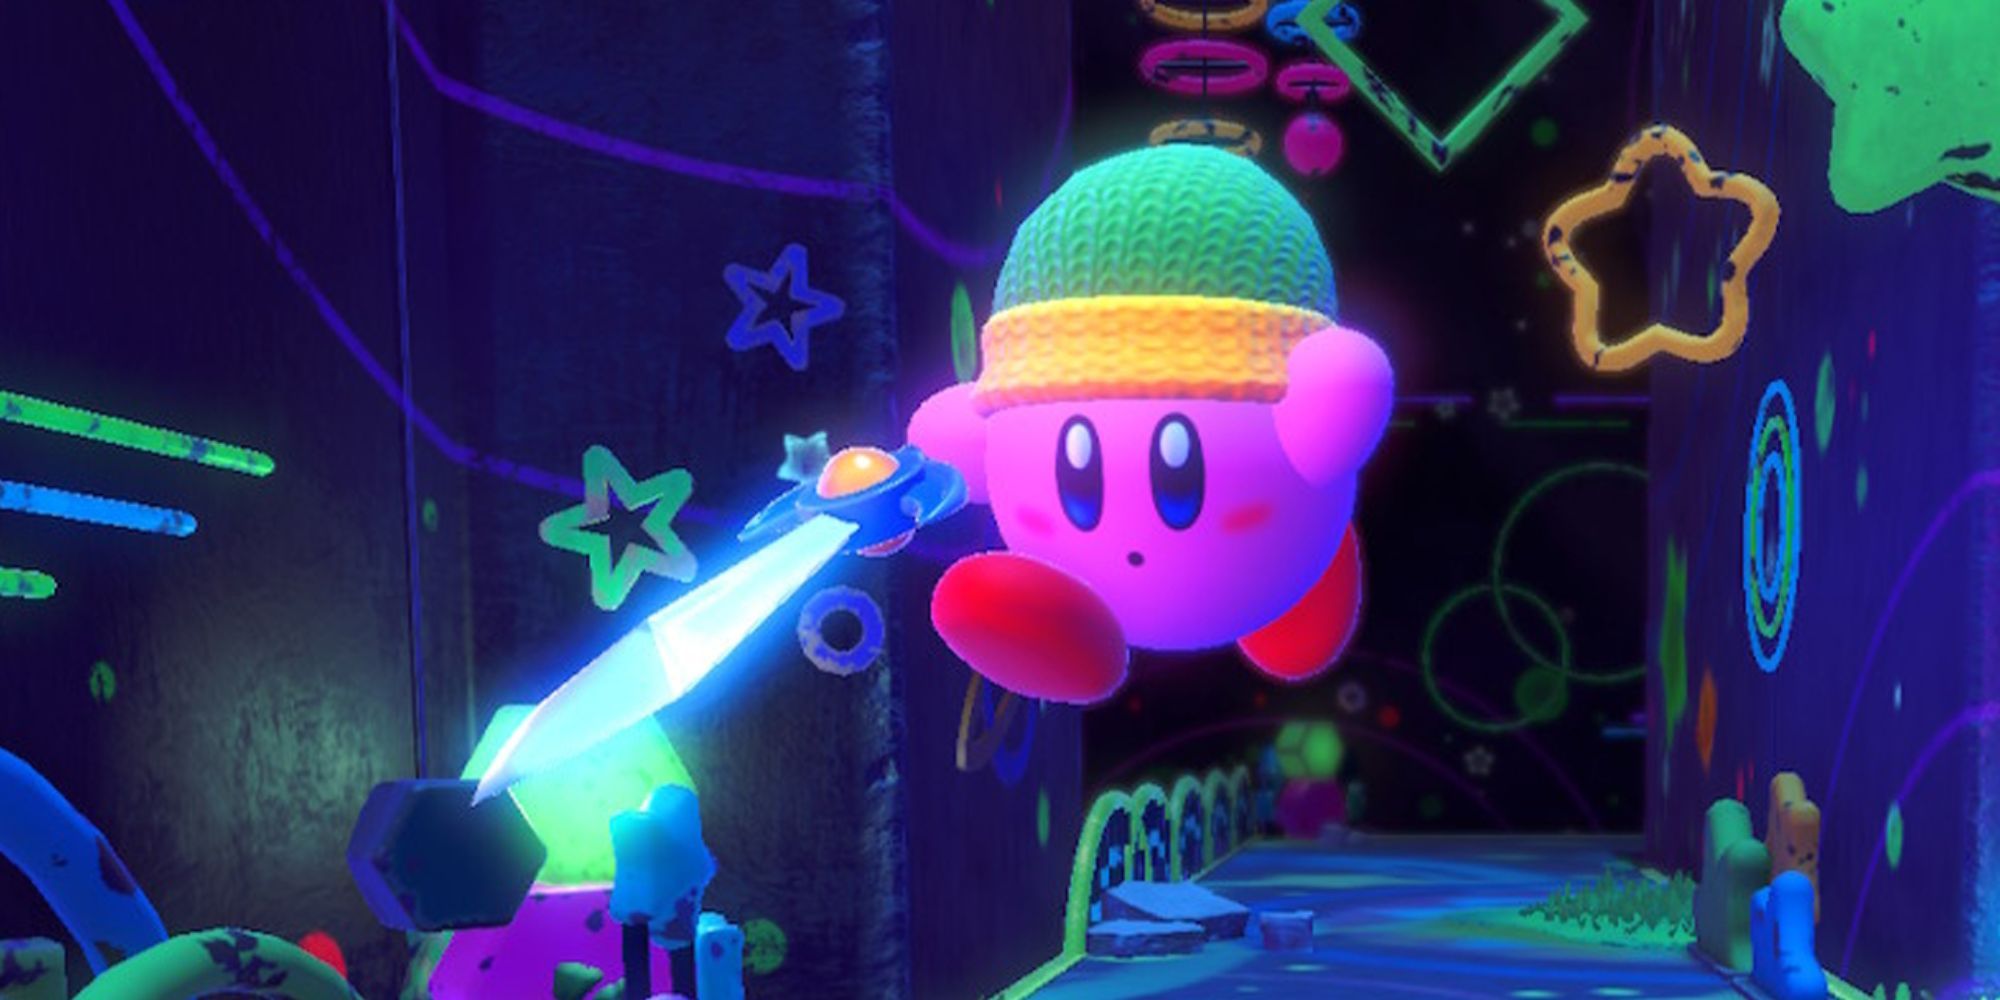 Kirby jumping through dark level with sword